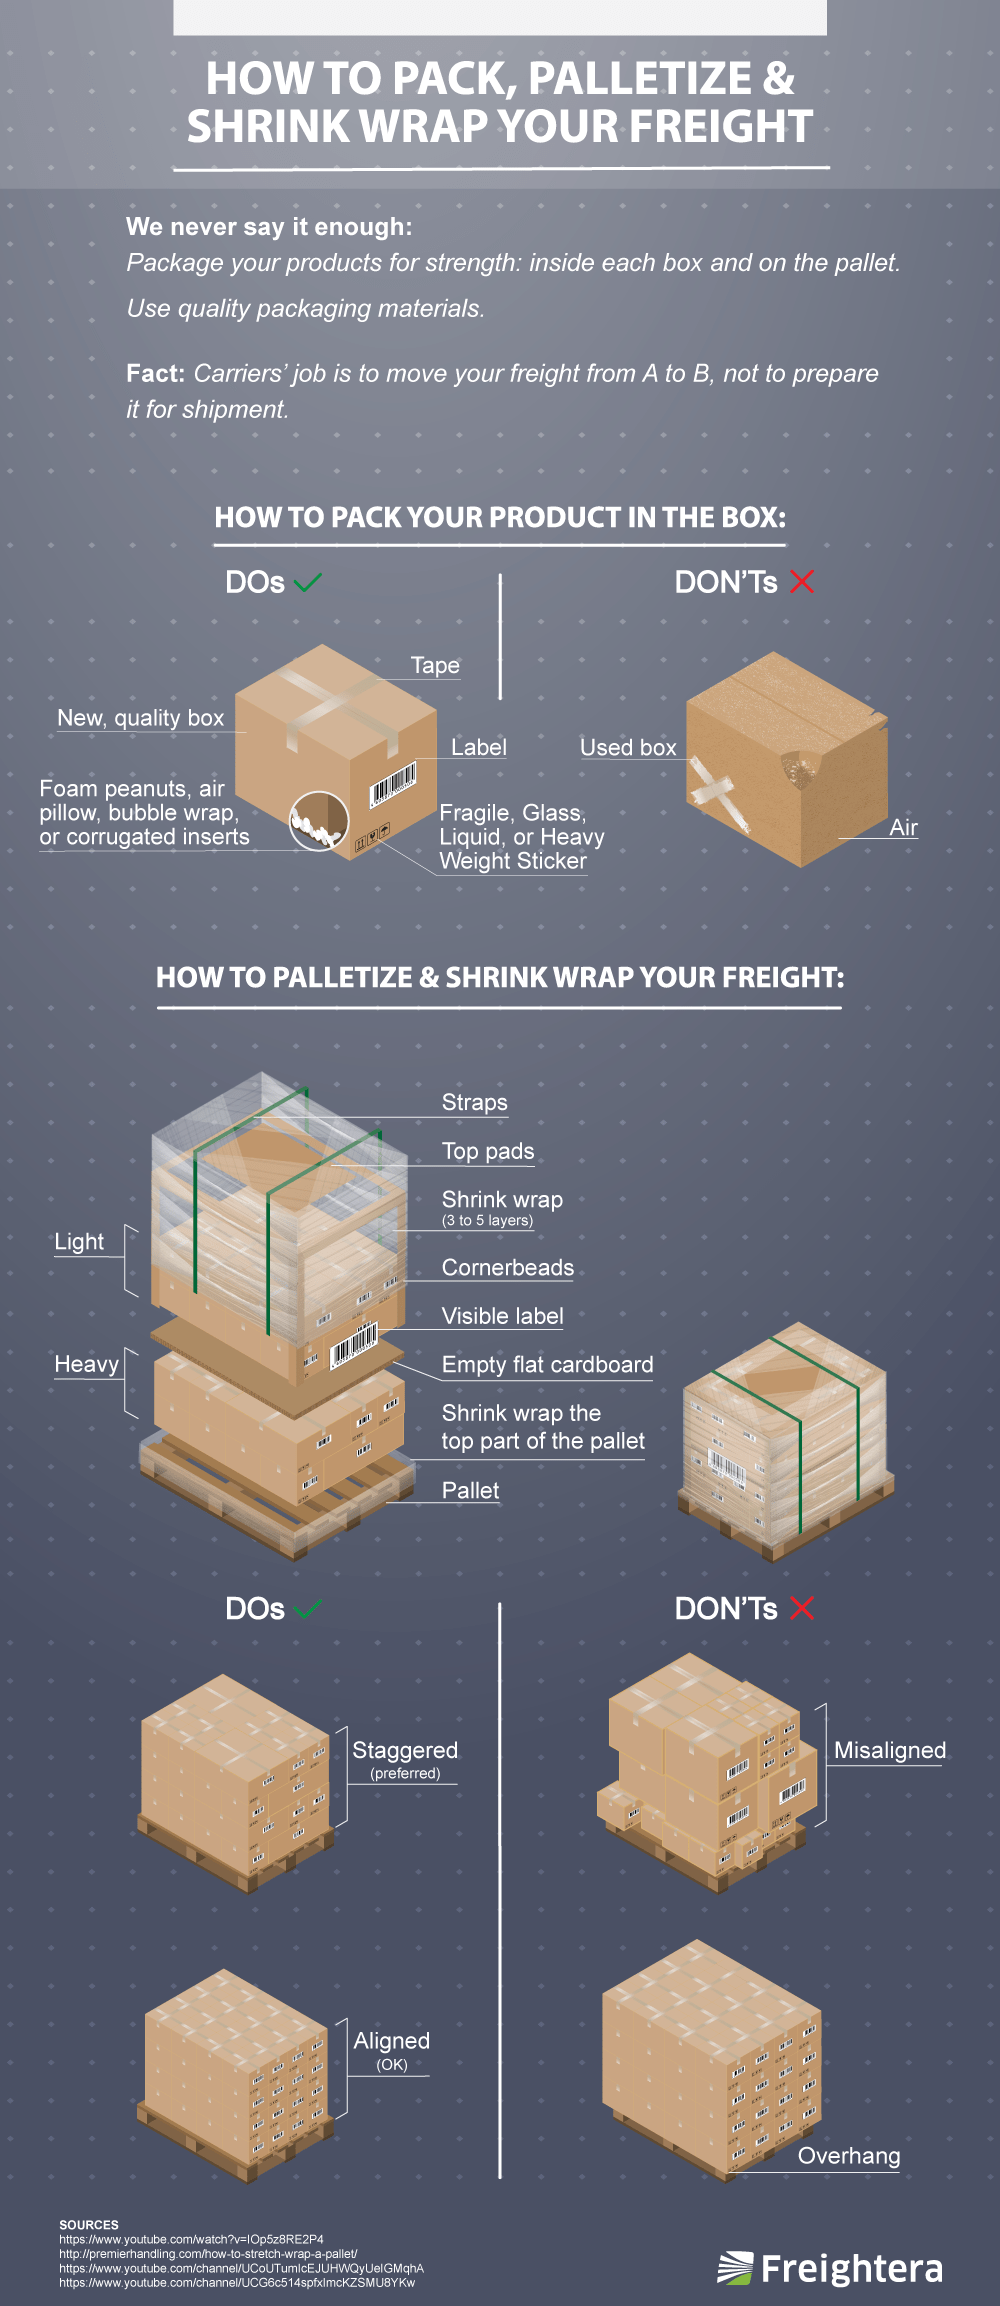 How to Pack, Palletize, Shrink Wrap Your Freight